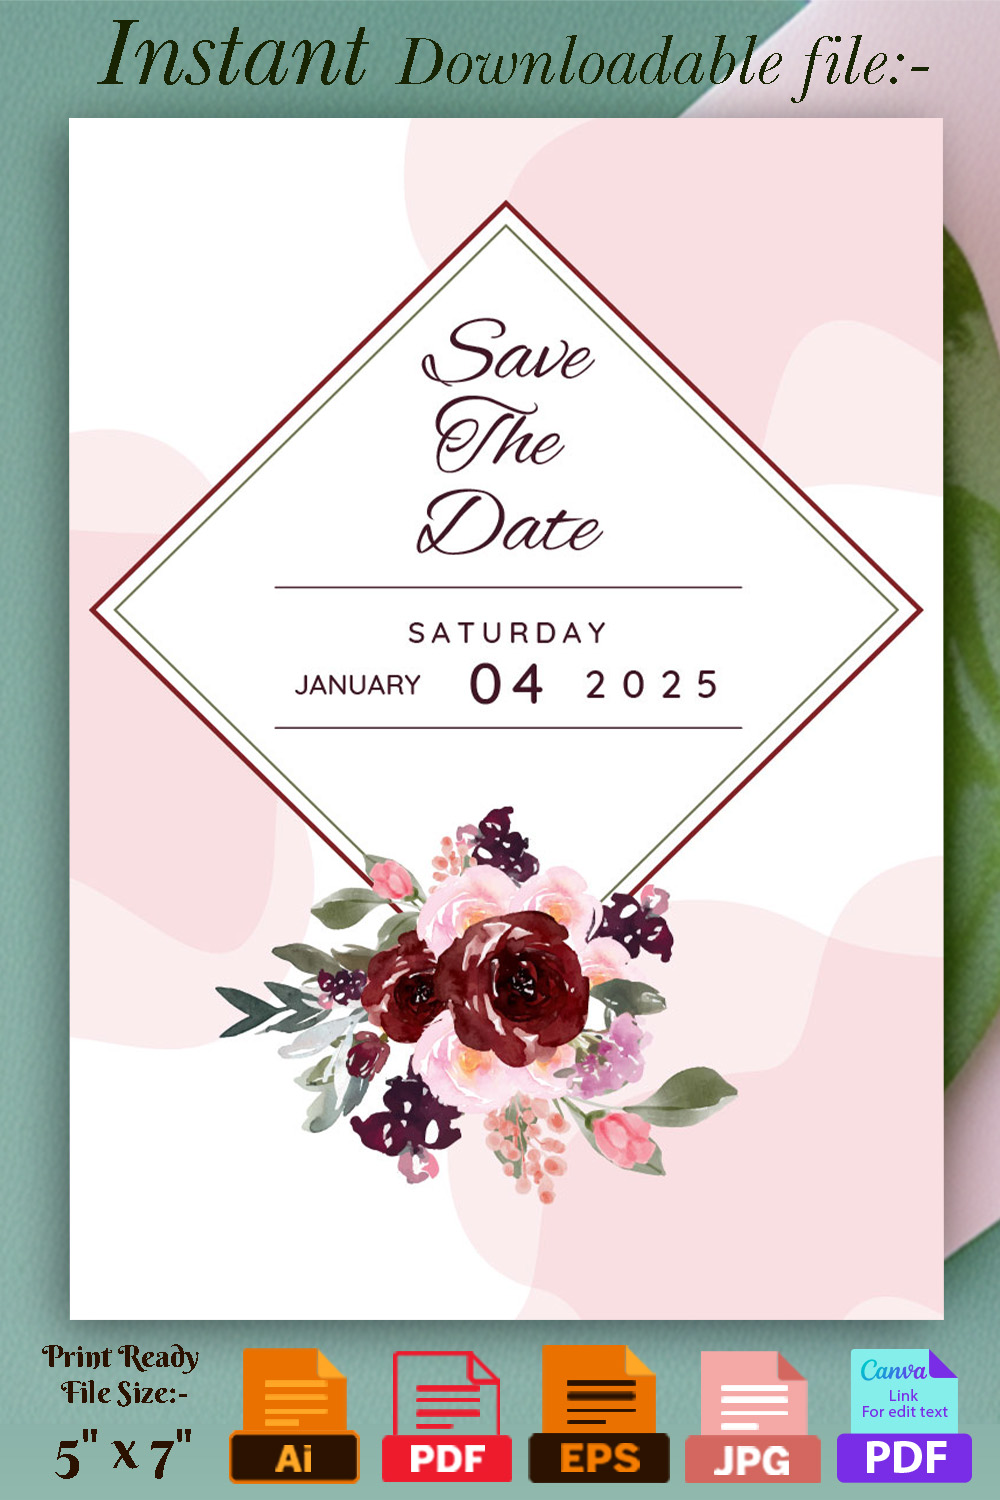 Image of an elegant wedding invitation in pink colors with flowers.